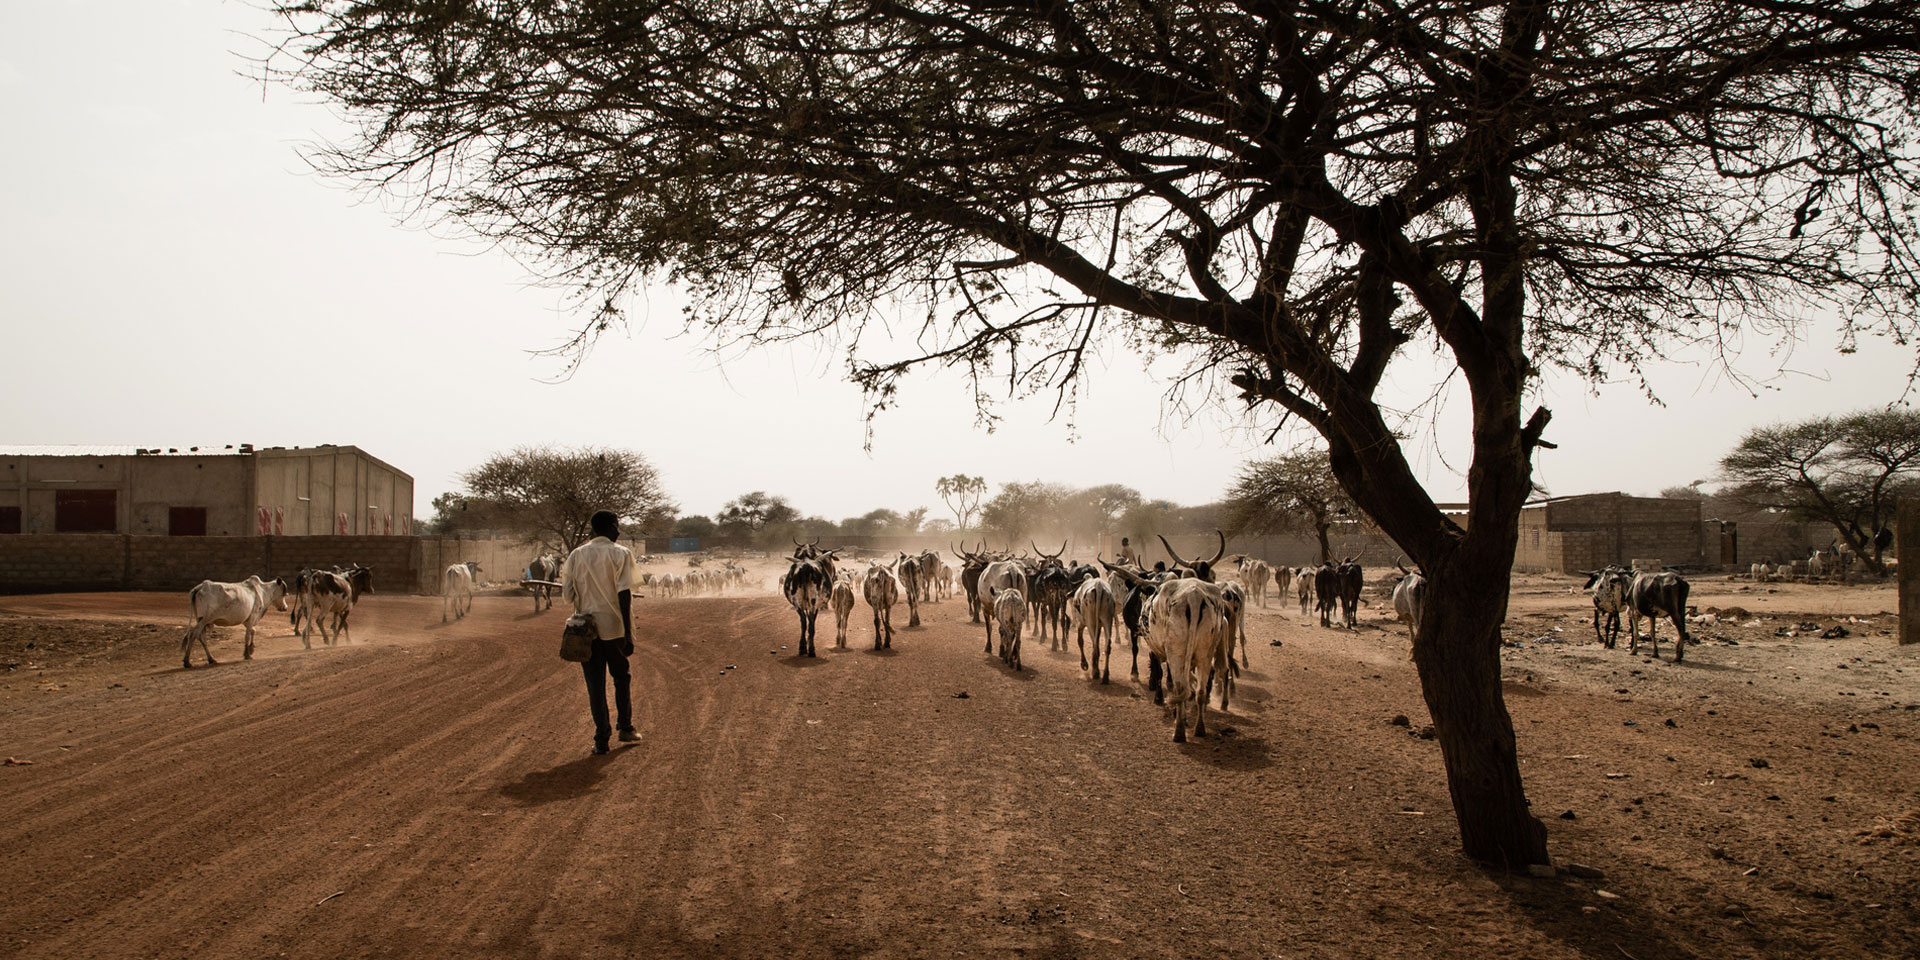 A cattle herder walks along a dusty road in Burkina Faso with a herd of cows.